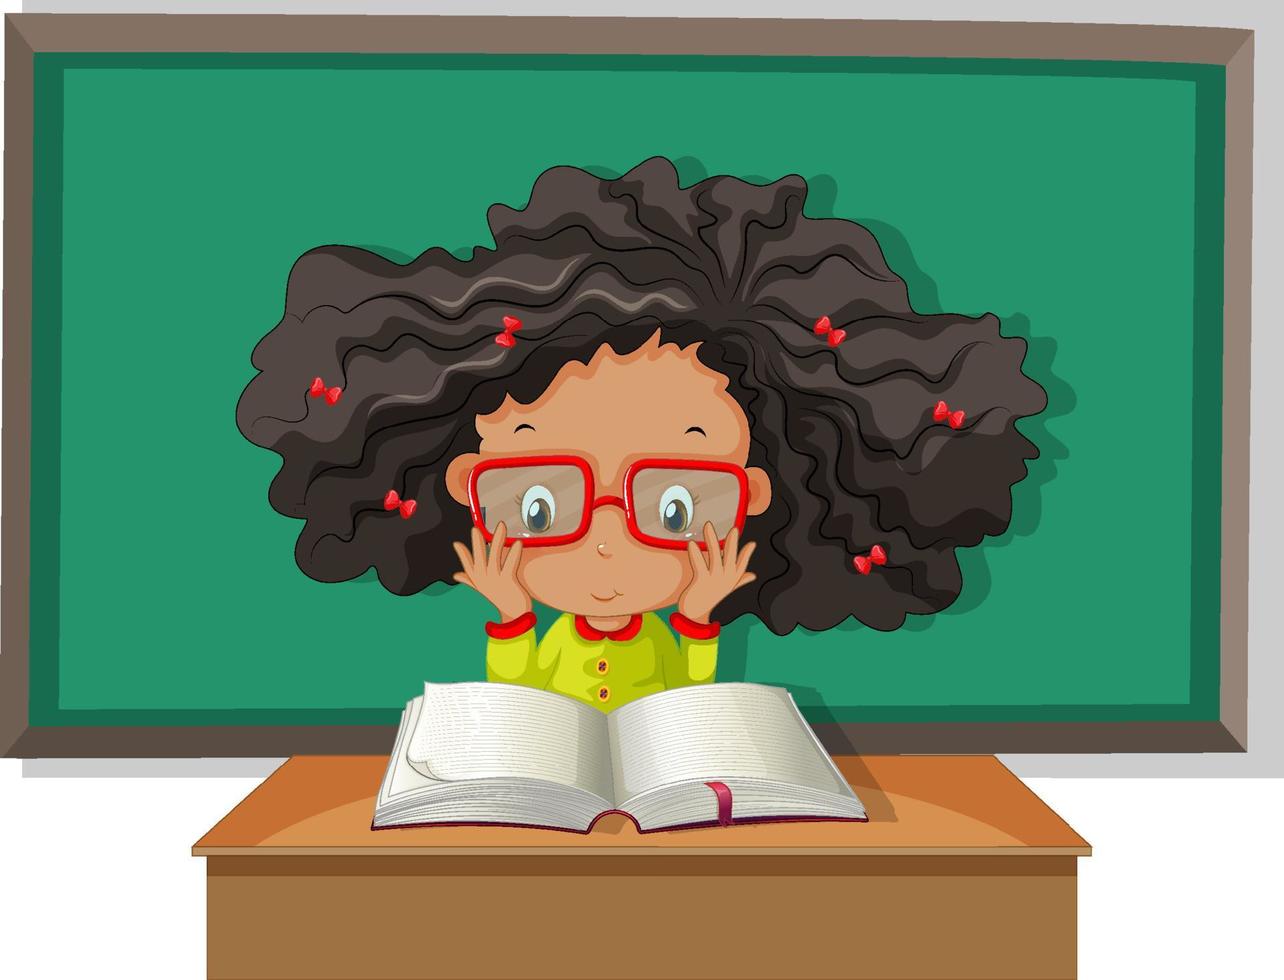 Student with curly hair reading a book wih board on the background vector